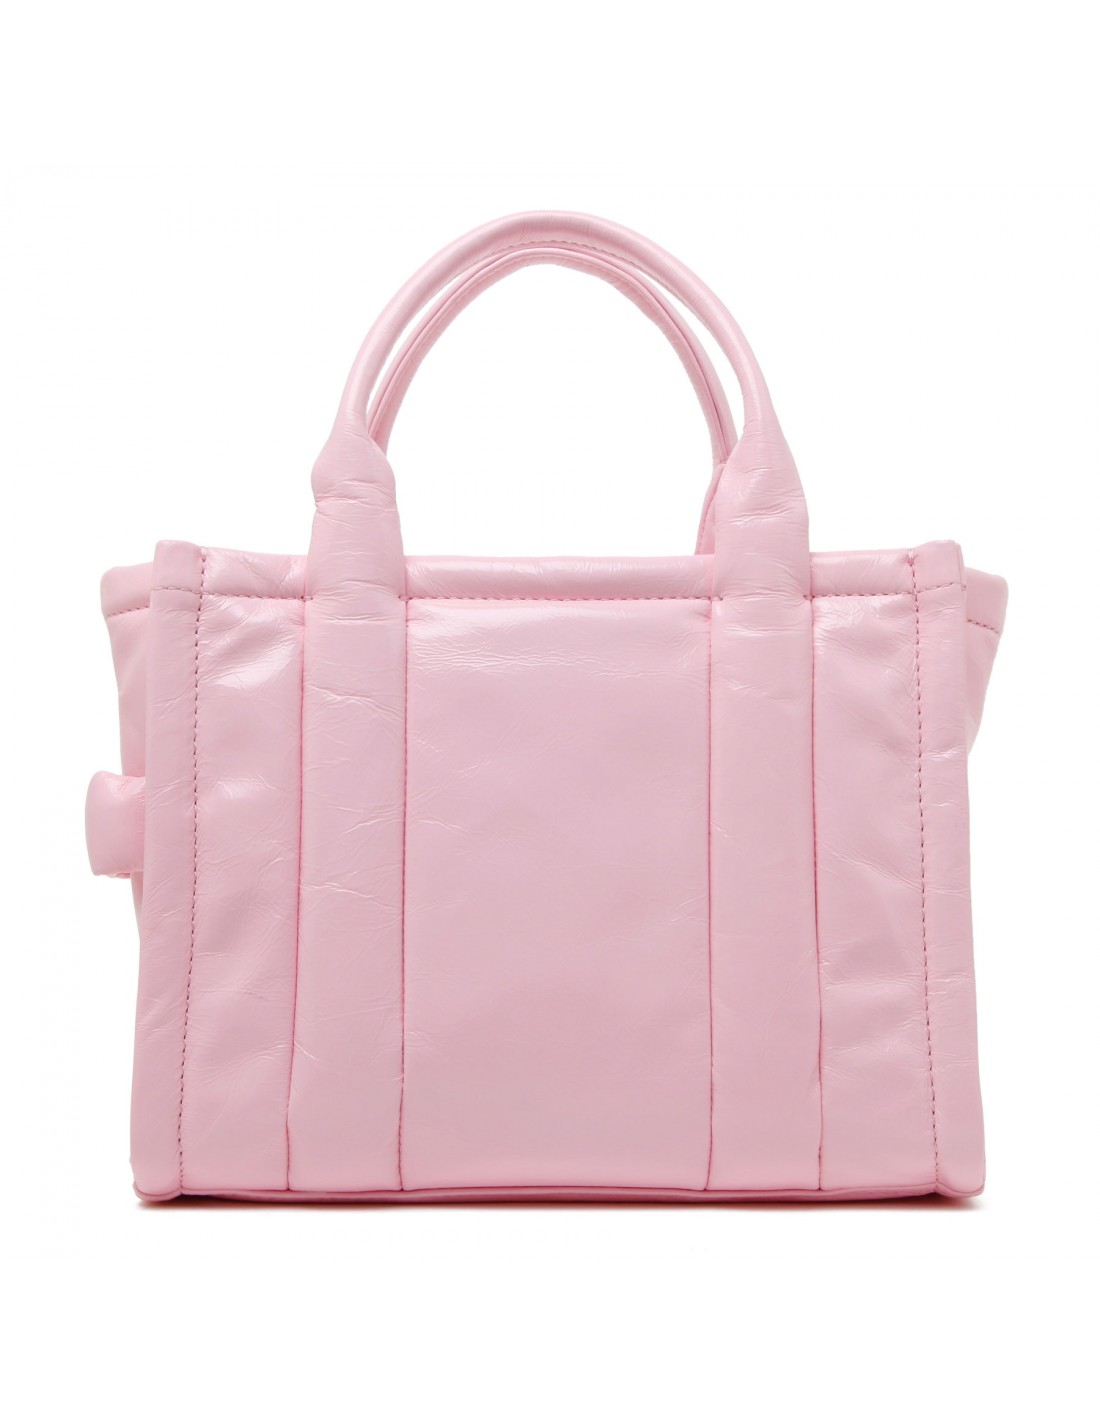 The Shiny Crinkle Small Tote Bag